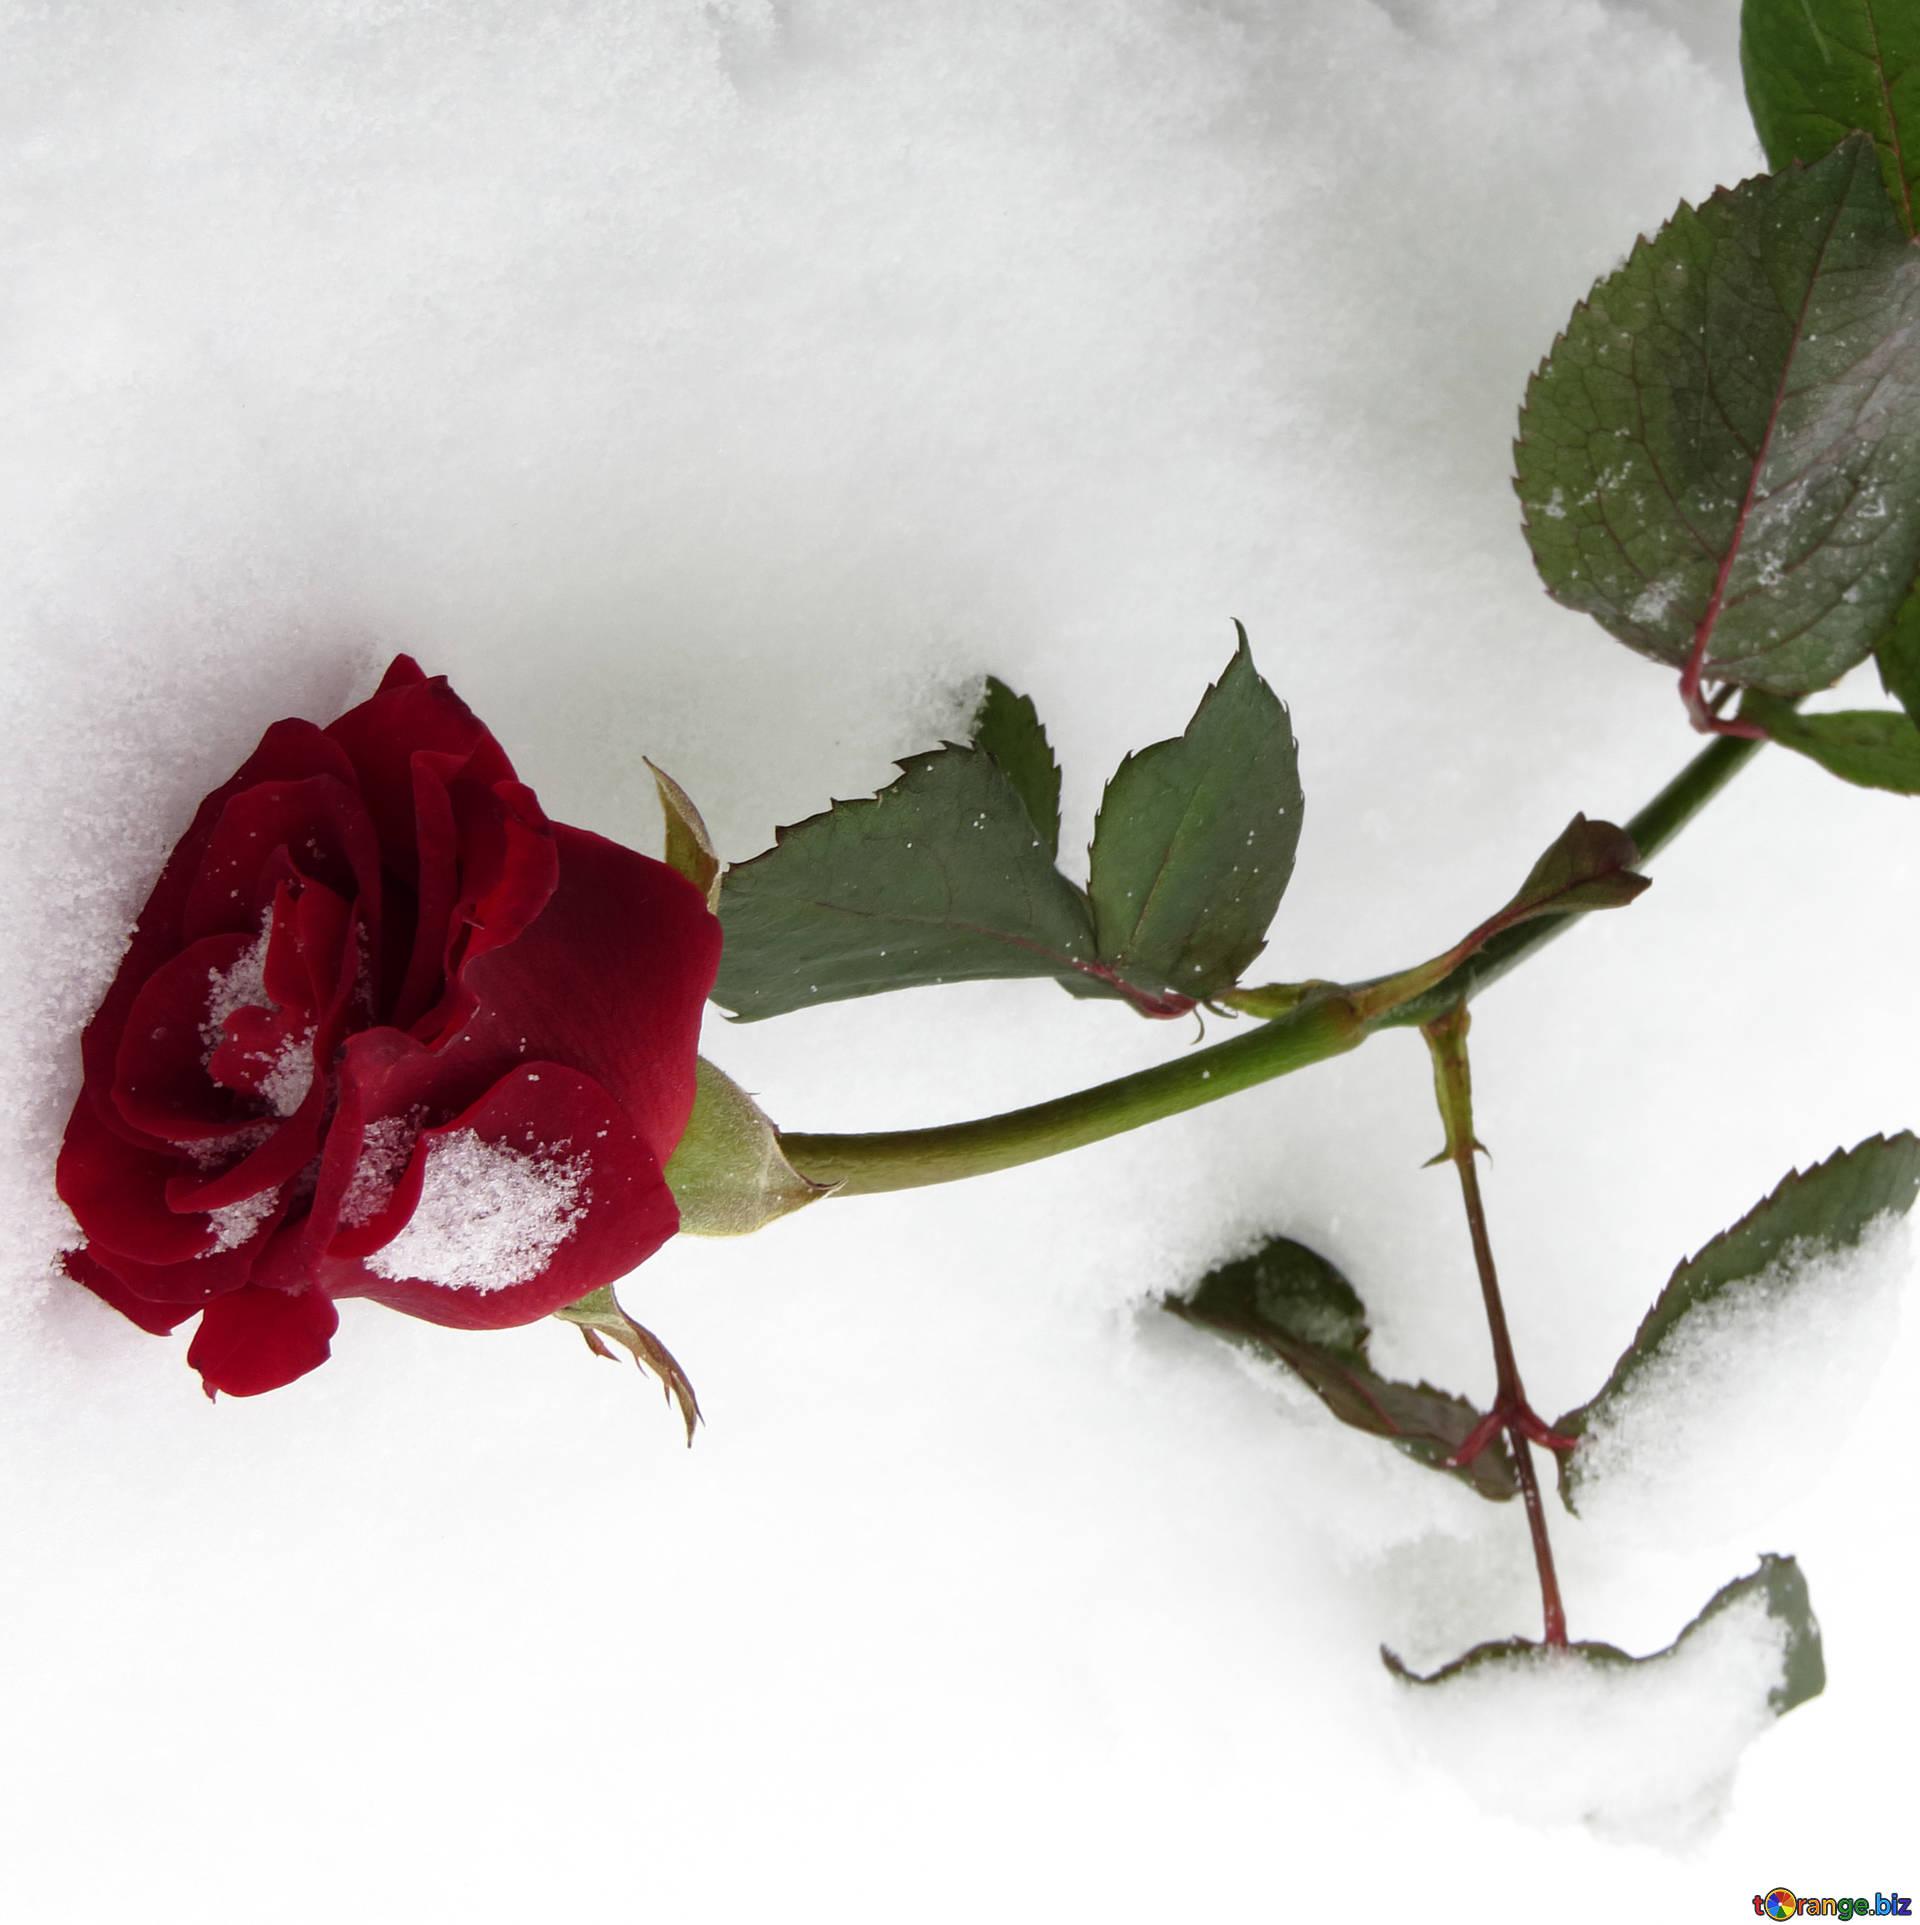 Winter rose wilted roses in winter on snow rose flower № 16954